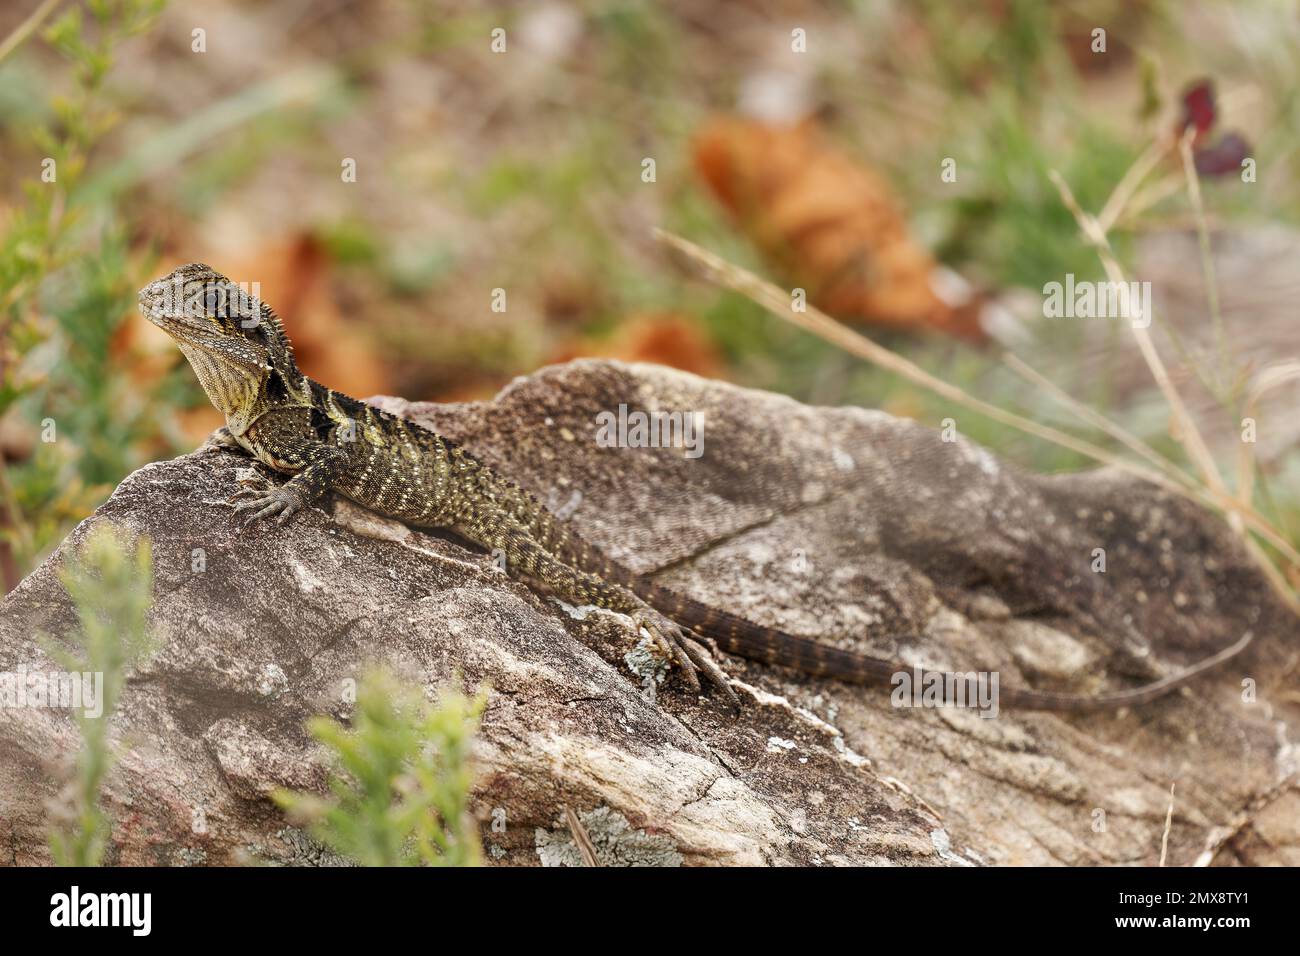 Australian Water Dragon - Intellagama or Physignathus lesueurii howittii, also Eastern or Gippsland water dragon, lizard on the rock above the sea. Stock Photo